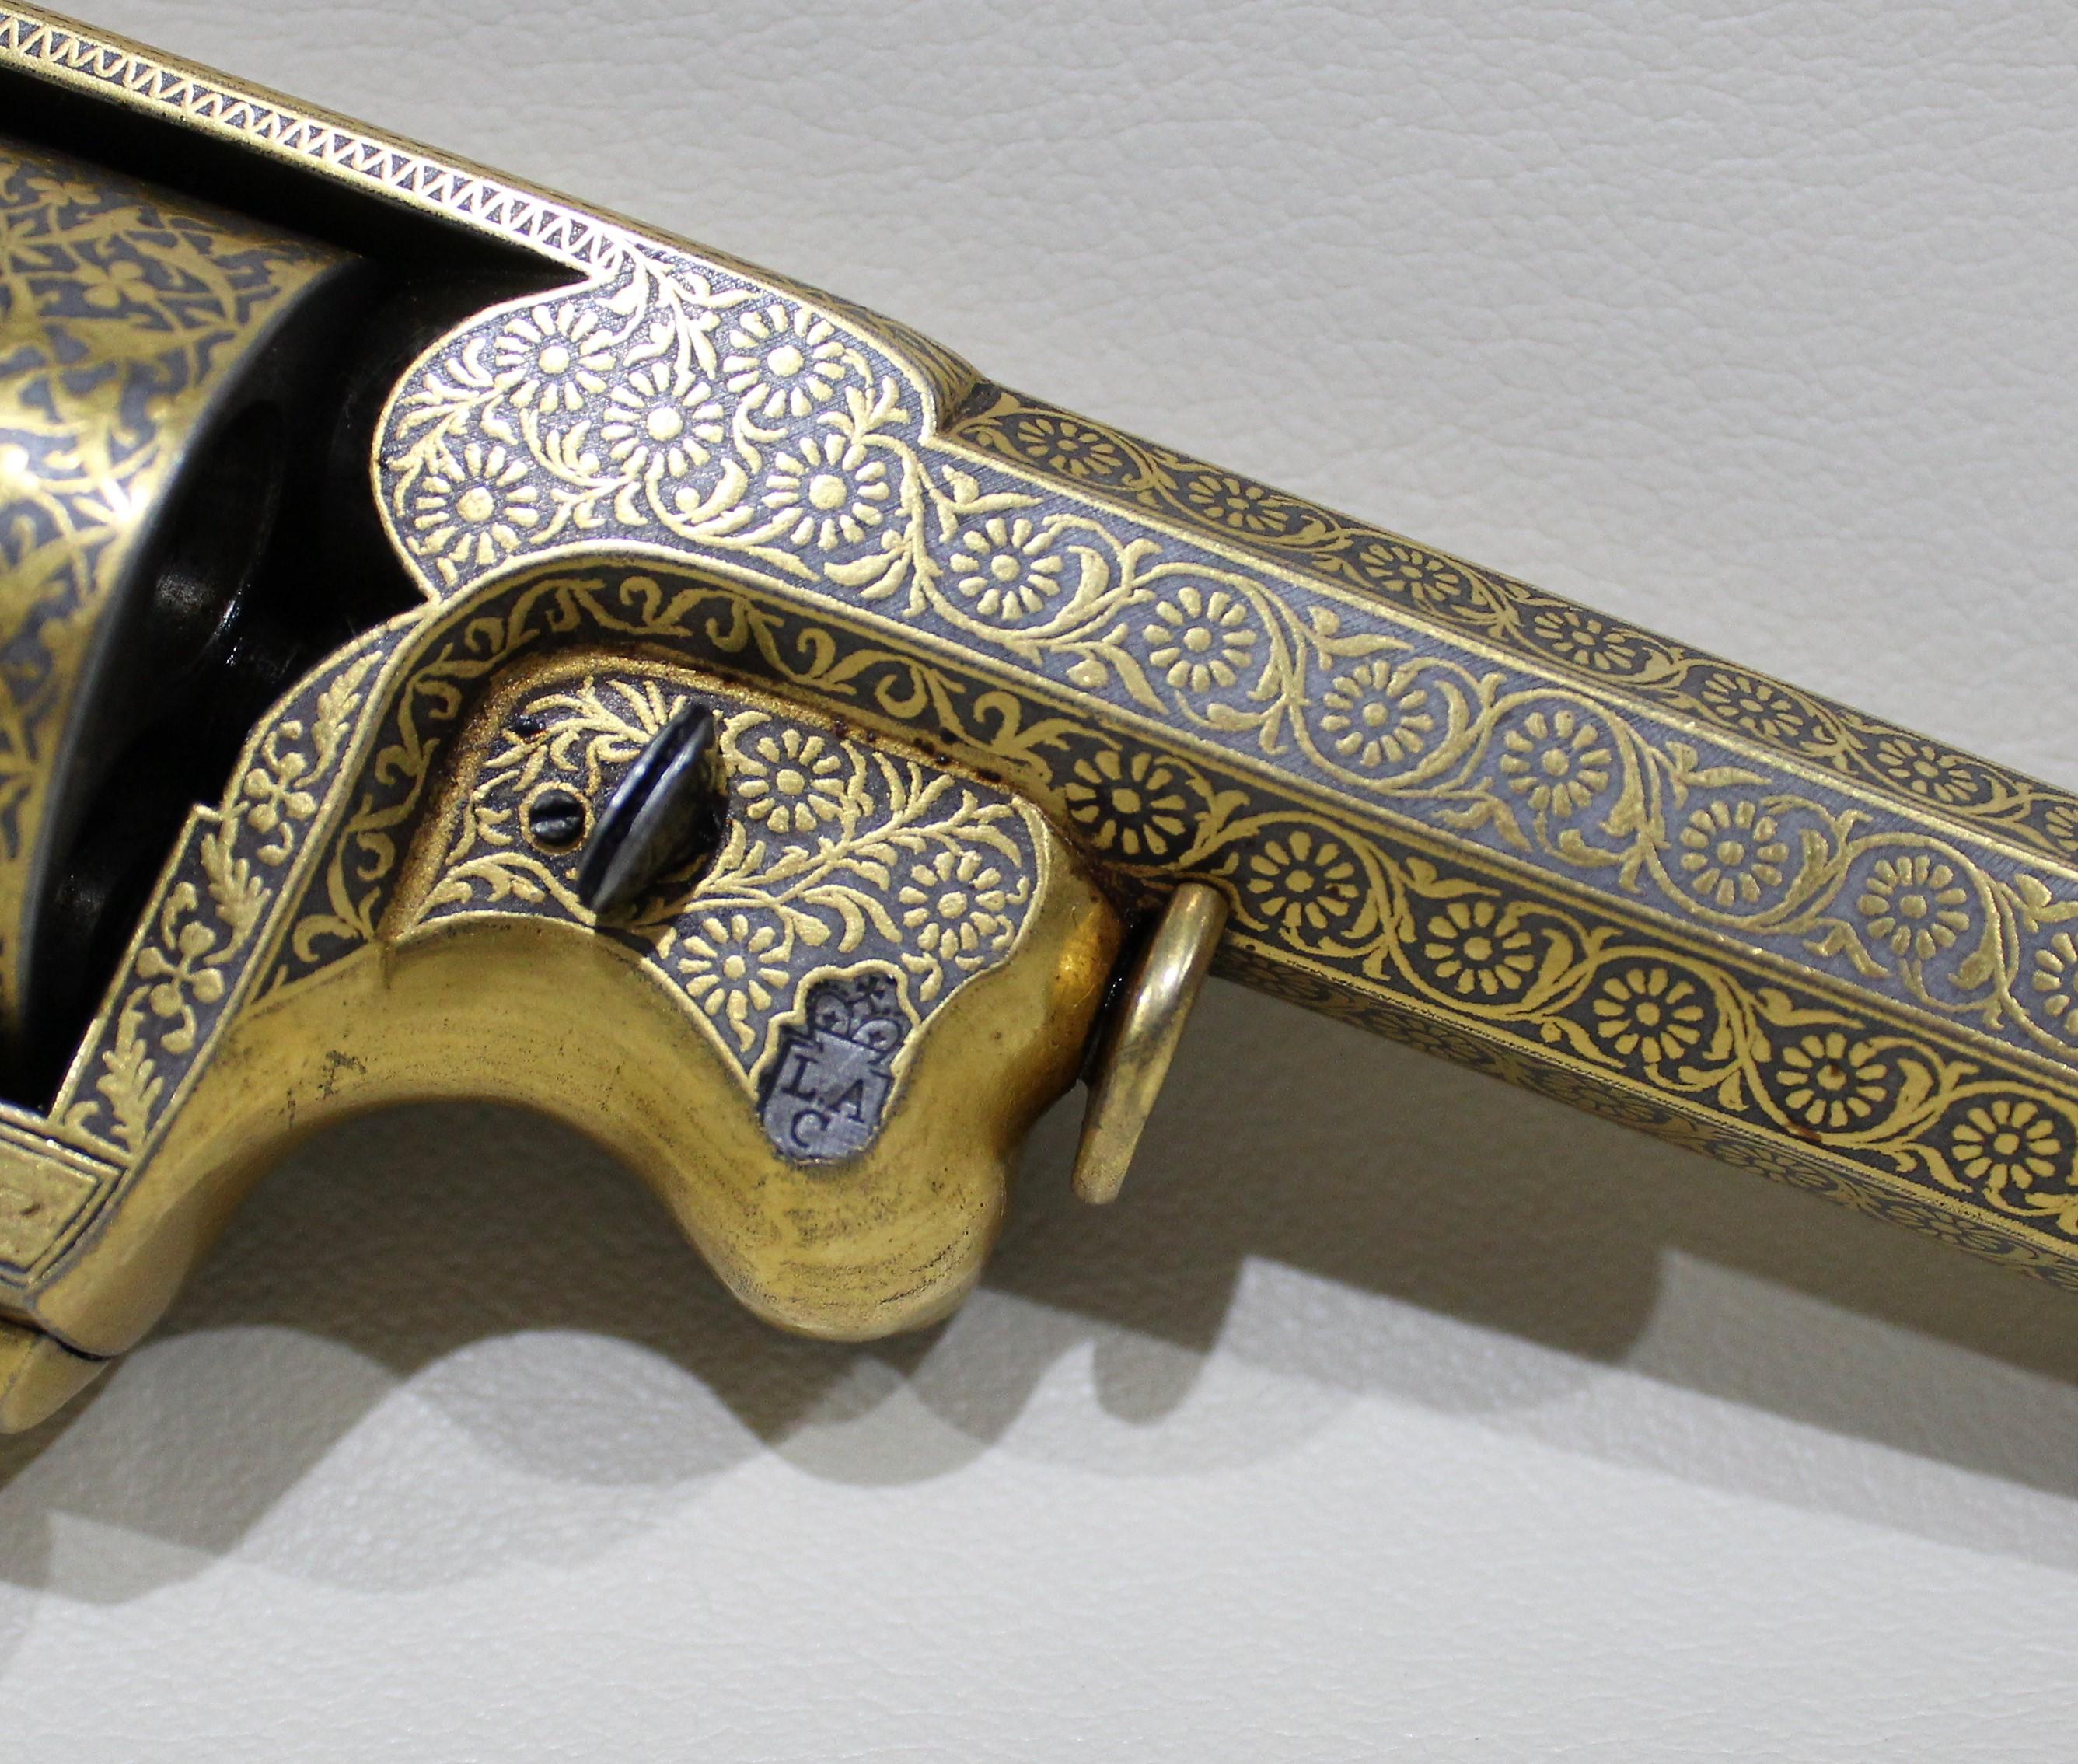 Beaumont-Adams Revolver with Gold Damascene Embellishment and Original Case 3